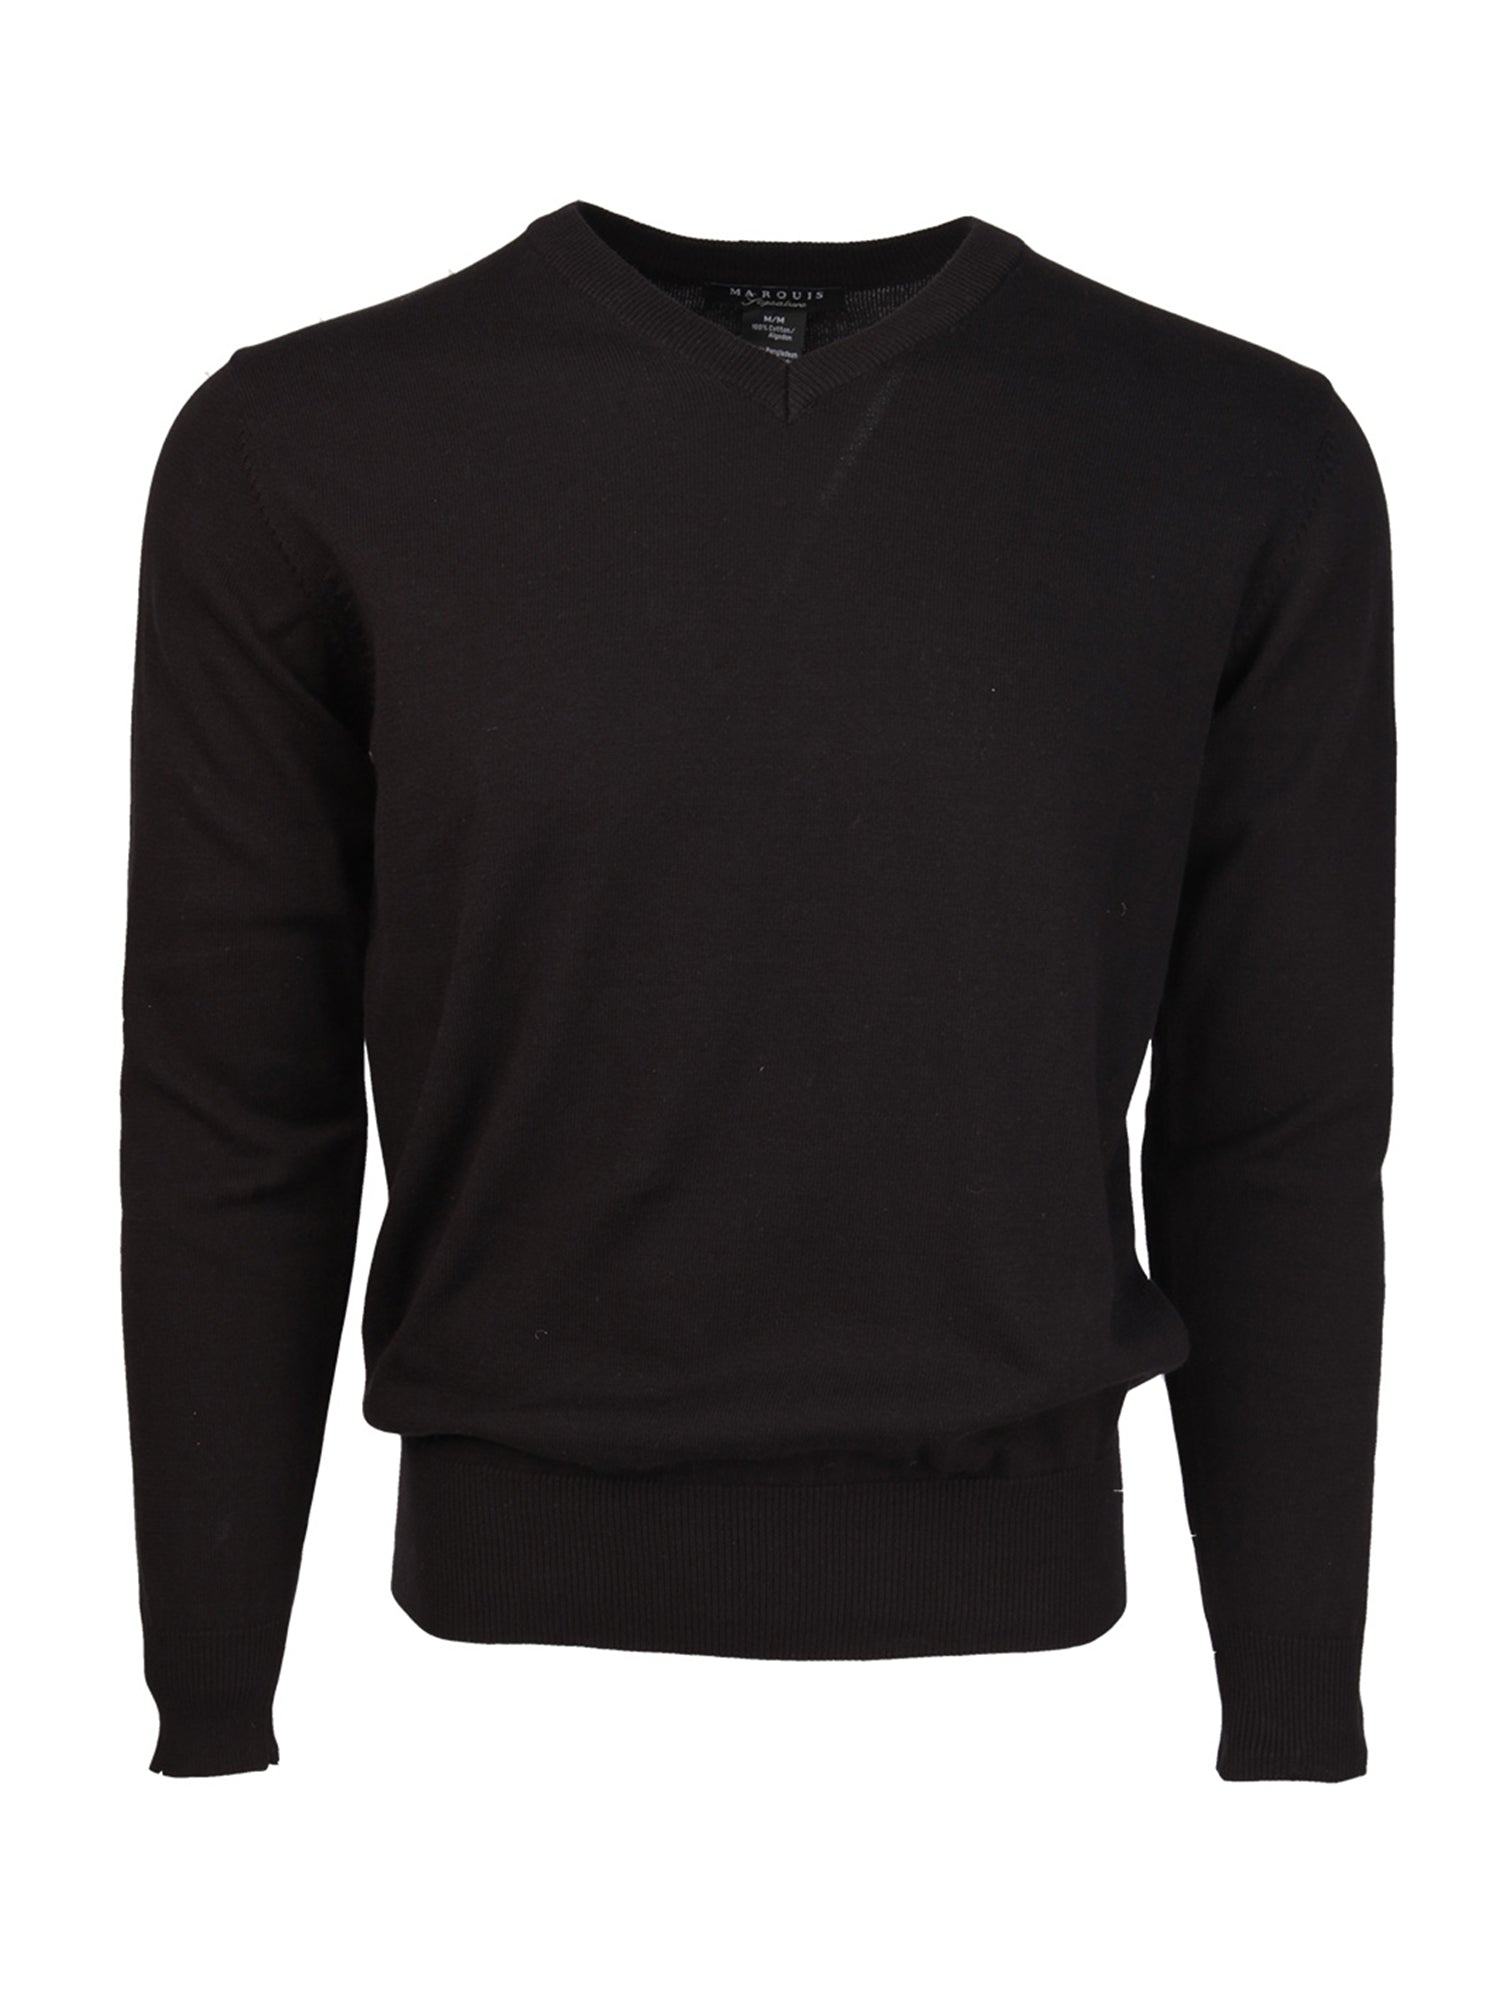 Marquis Men's Modern Fit Solid V-neck Cotton Sweater Sweater TheDapperTie Black Small 